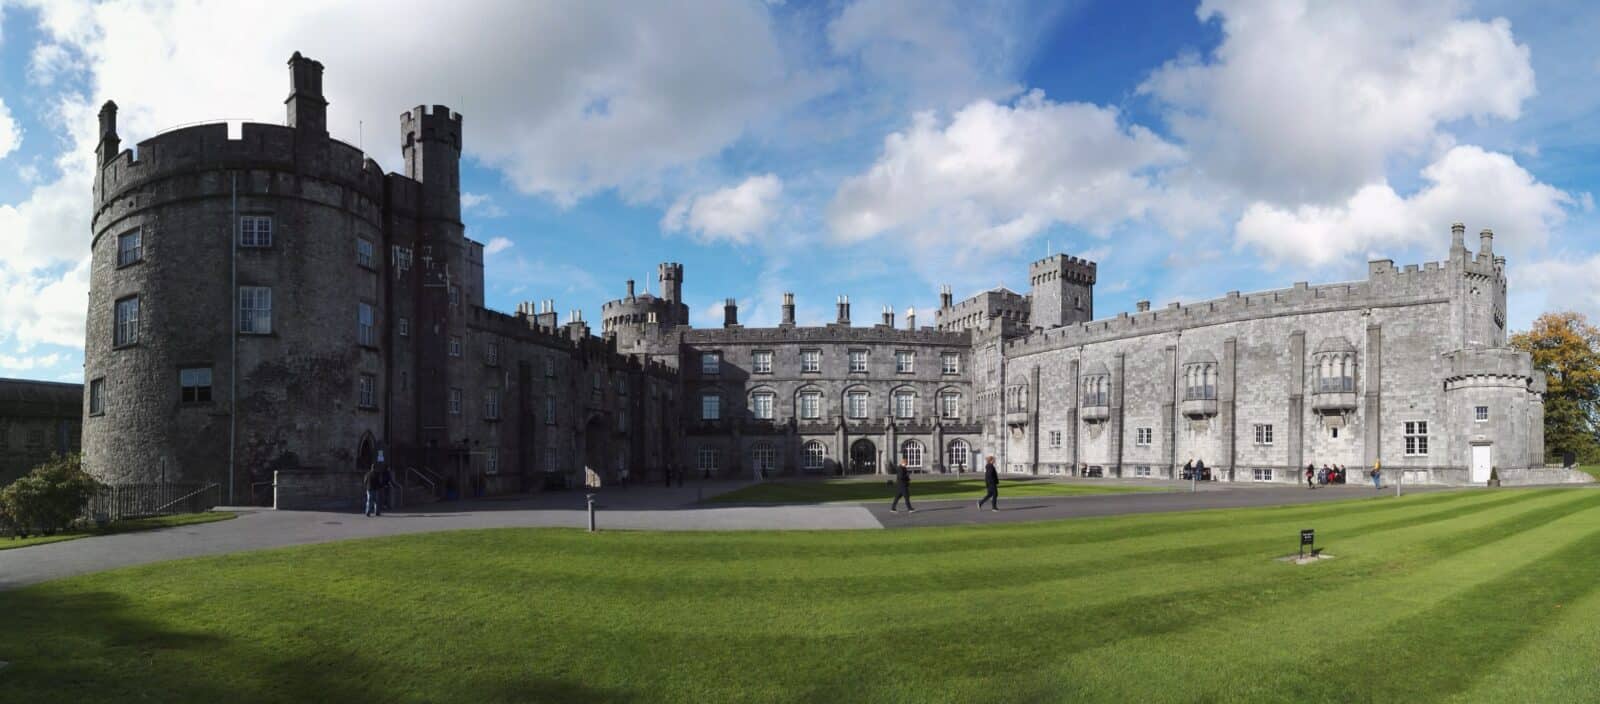 The Best Areas to Stay in Kilkenny